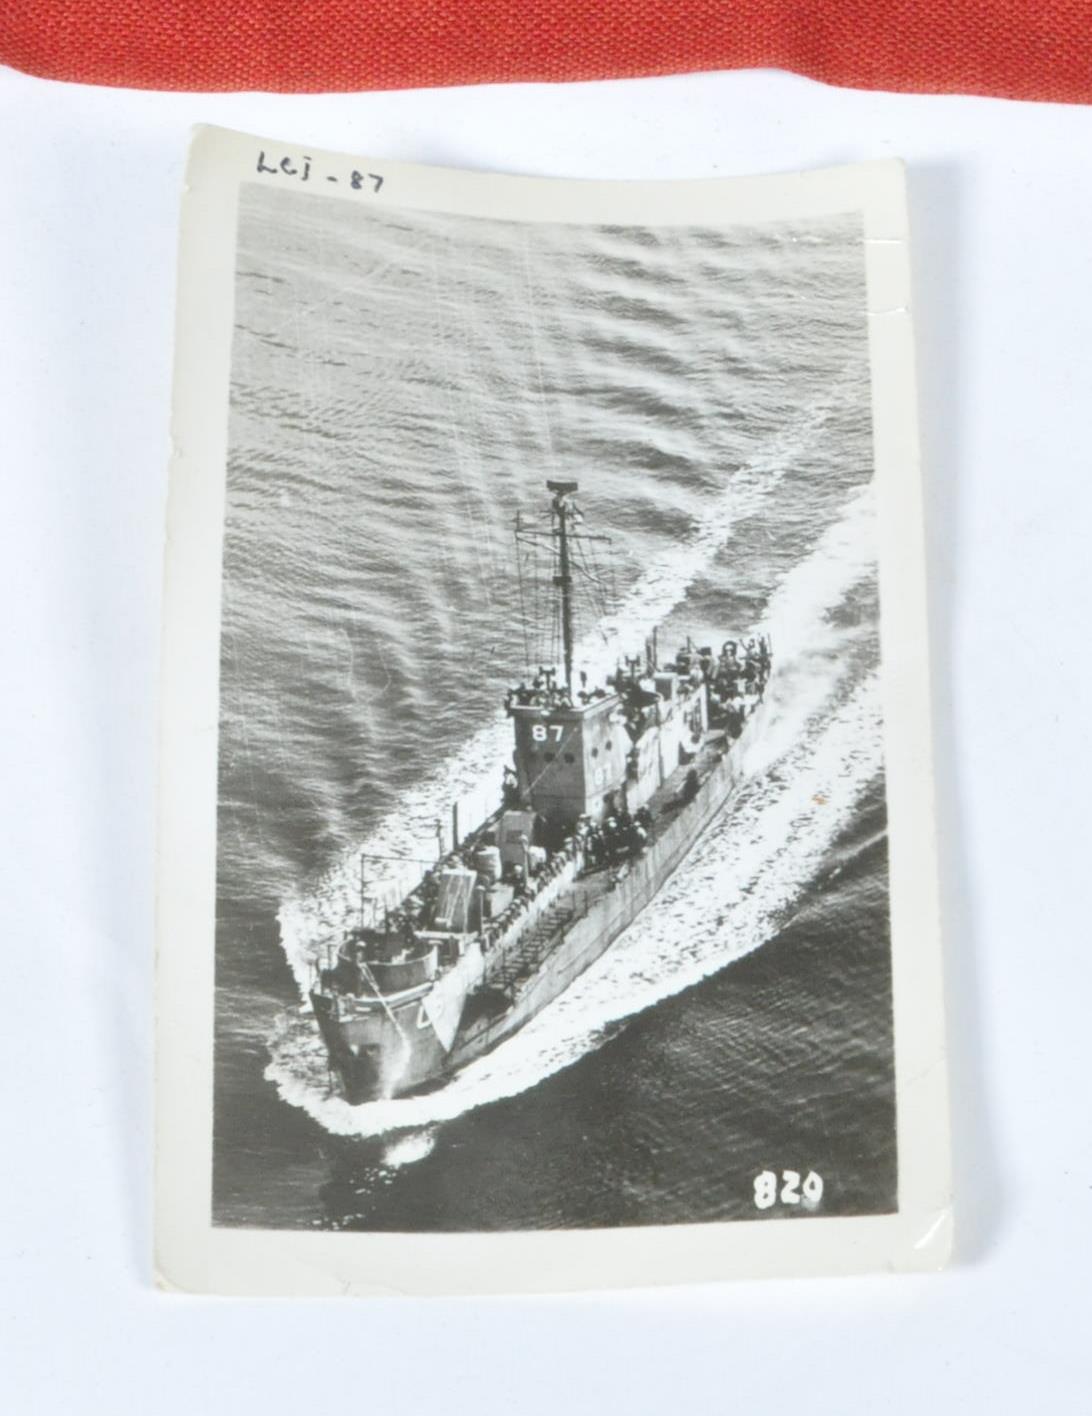 WWII SECOND WORLD WAR INTEREST - US NAVY FLAG - LCL 87 - Image 4 of 4